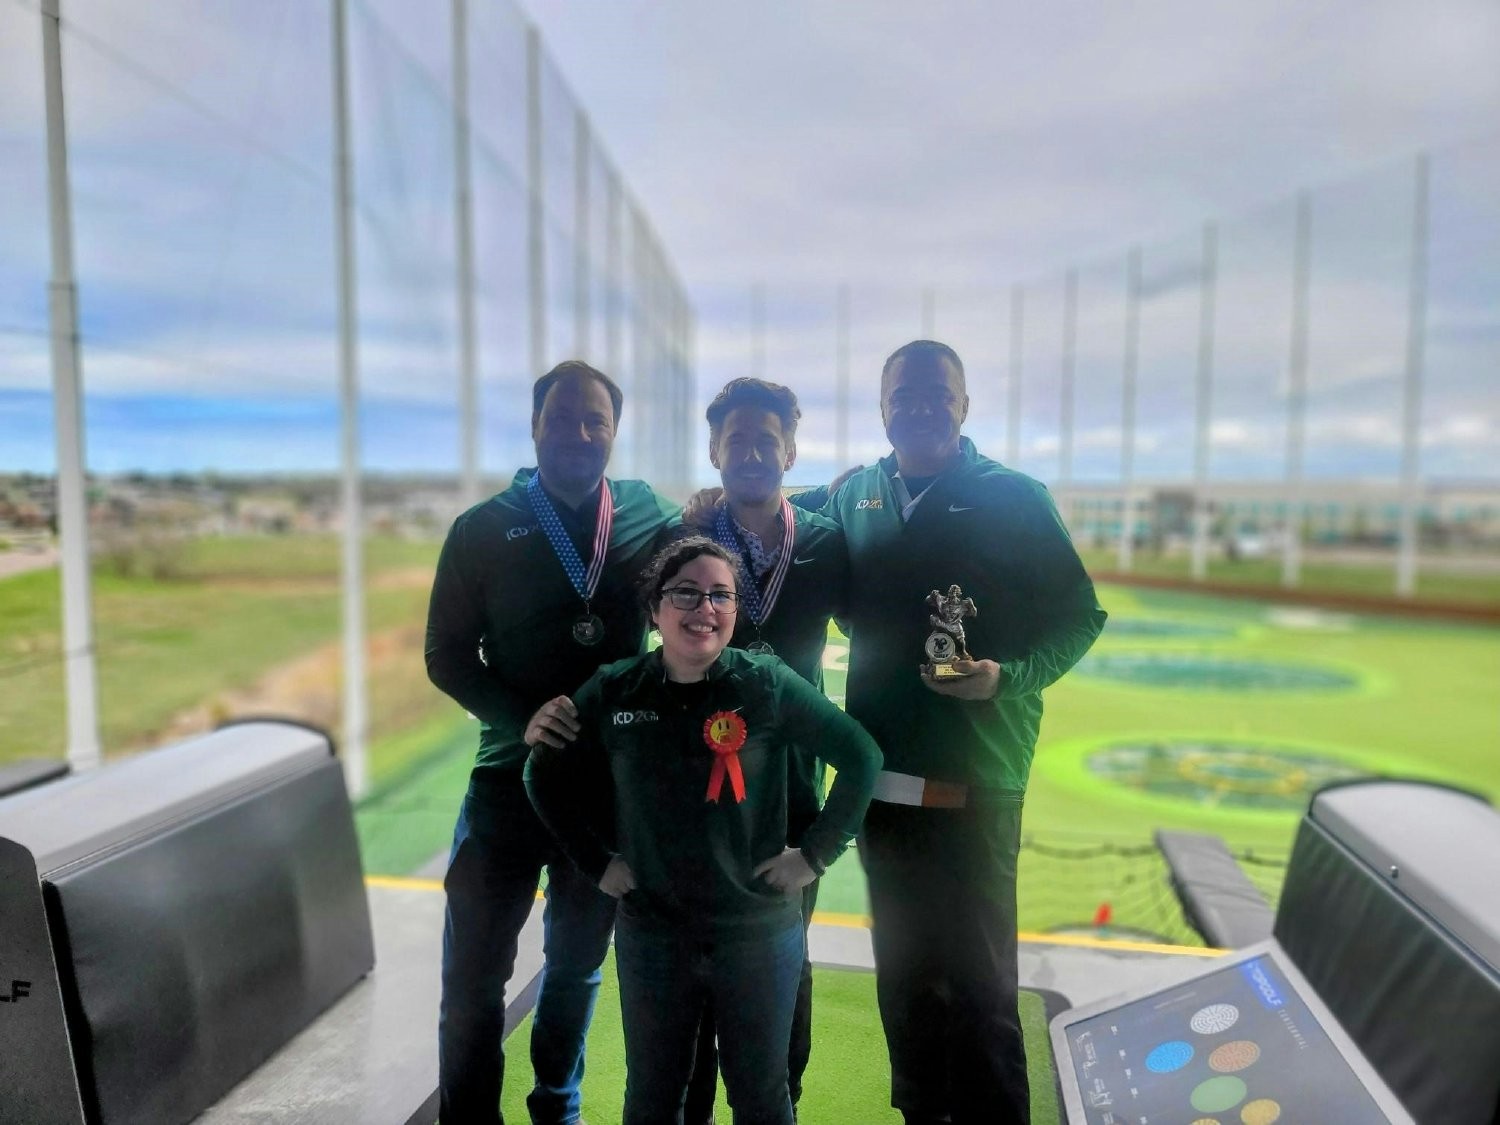 Top Golf Awards... 1st, 2nd, 3rd, and last place.